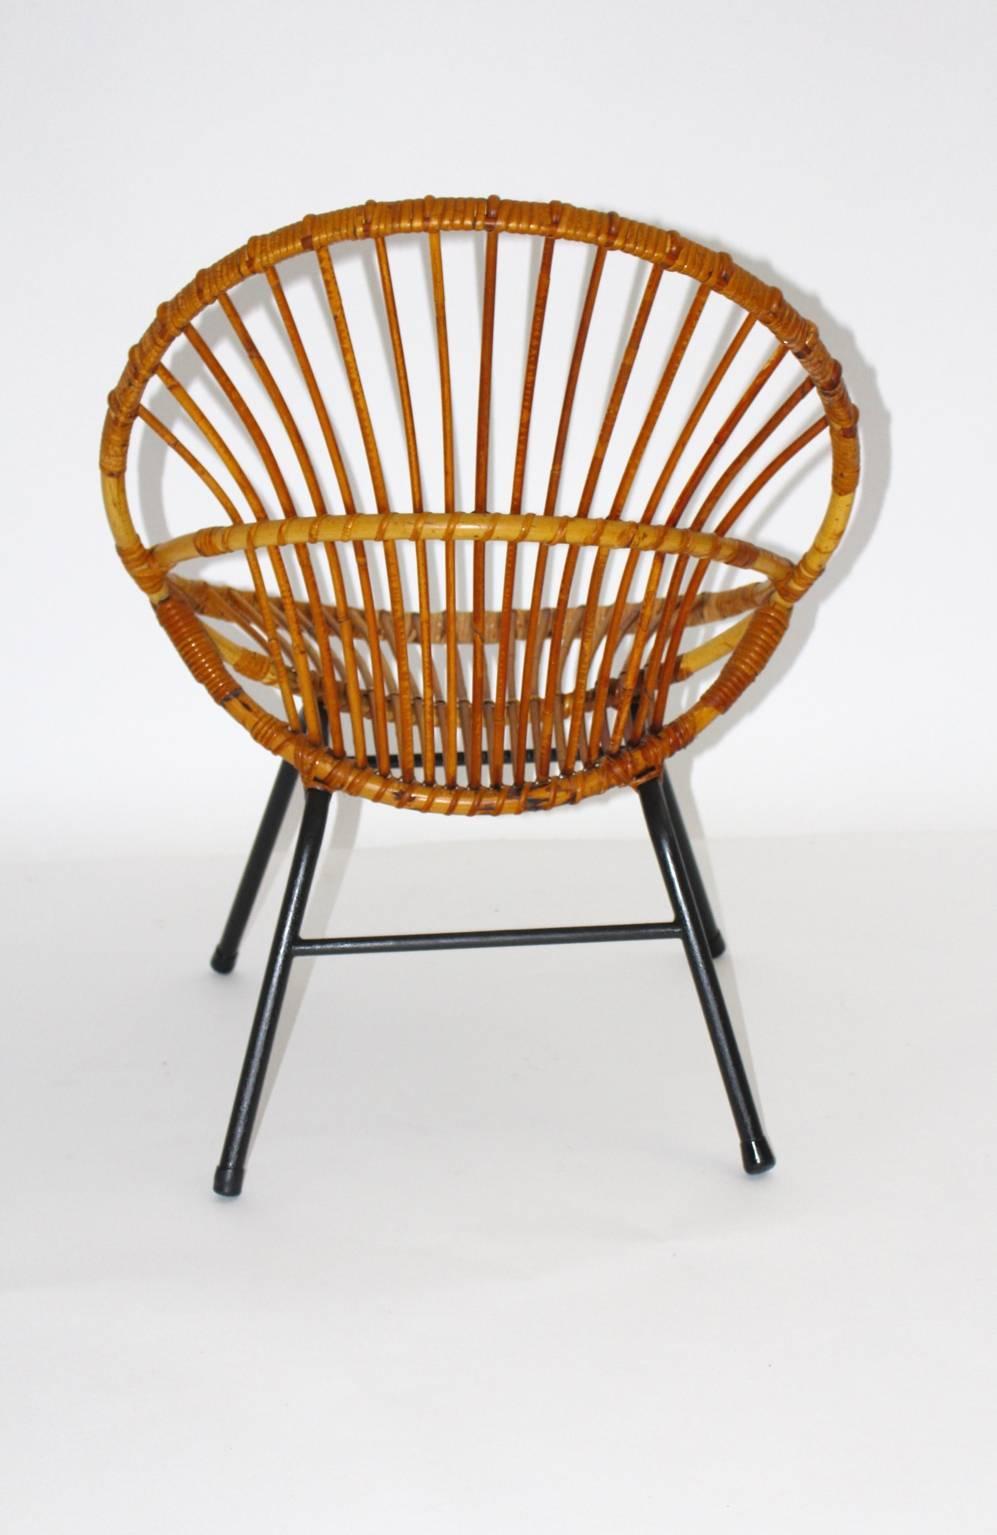 Mid Century Modern vintage rattan chair by Rohe Noordwolde, Netherlands, 1960s.
The seat shell was made of rattan and the tube steel base was black lacquered.
The metal feet features rubber sabots.
The seat is in good vintage condition and ready to